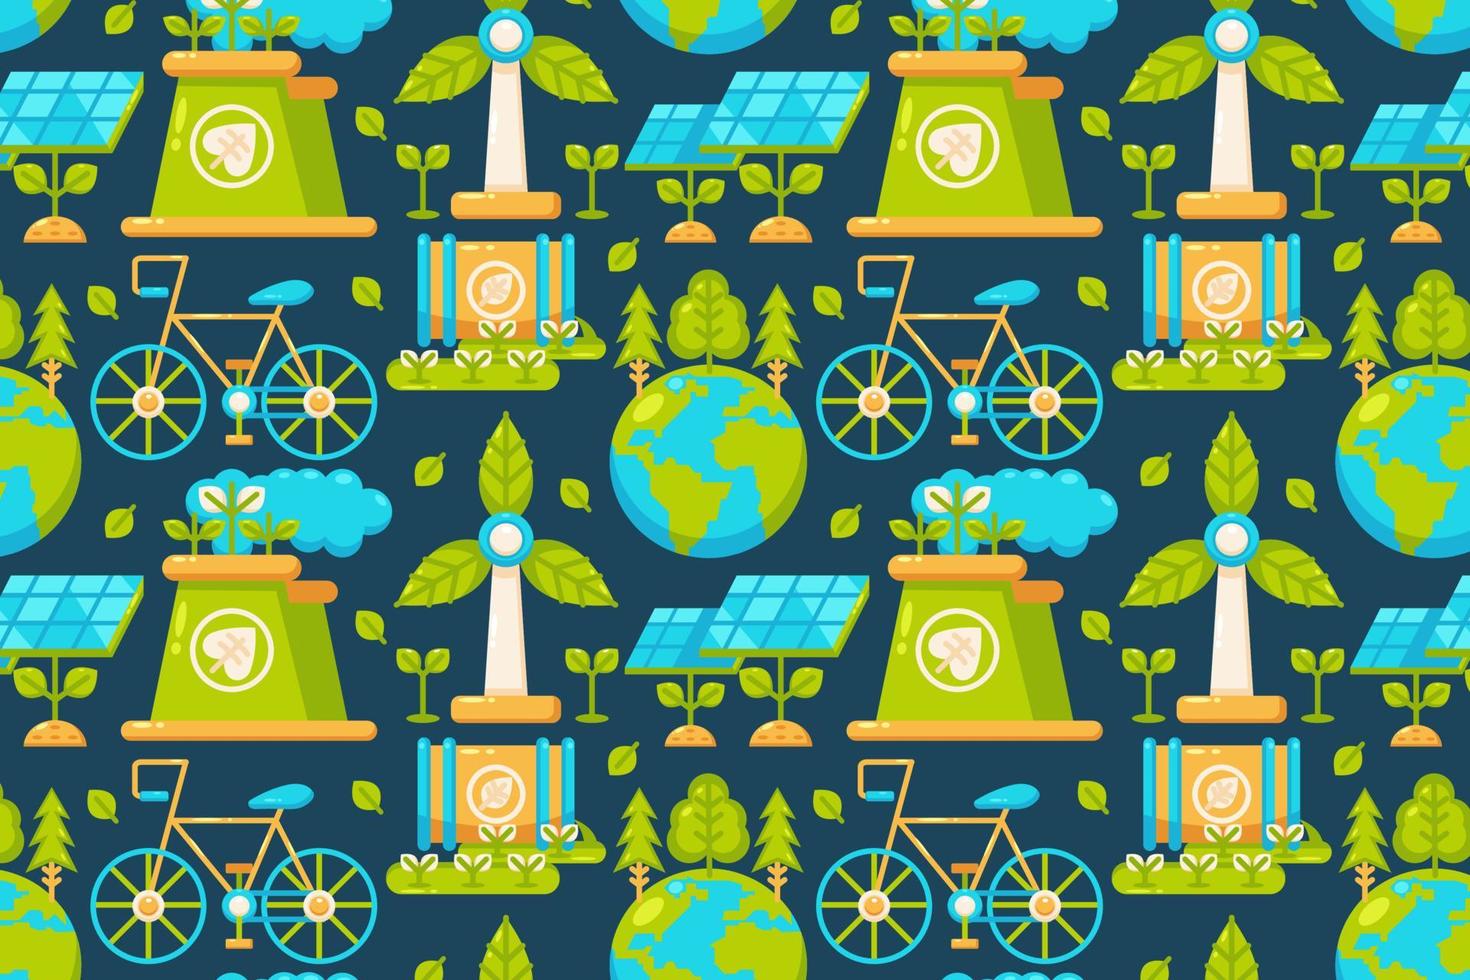 Happy Earth Day. Earth, factories, windmills, bicycles, solar panels, and natural waste patterns vector